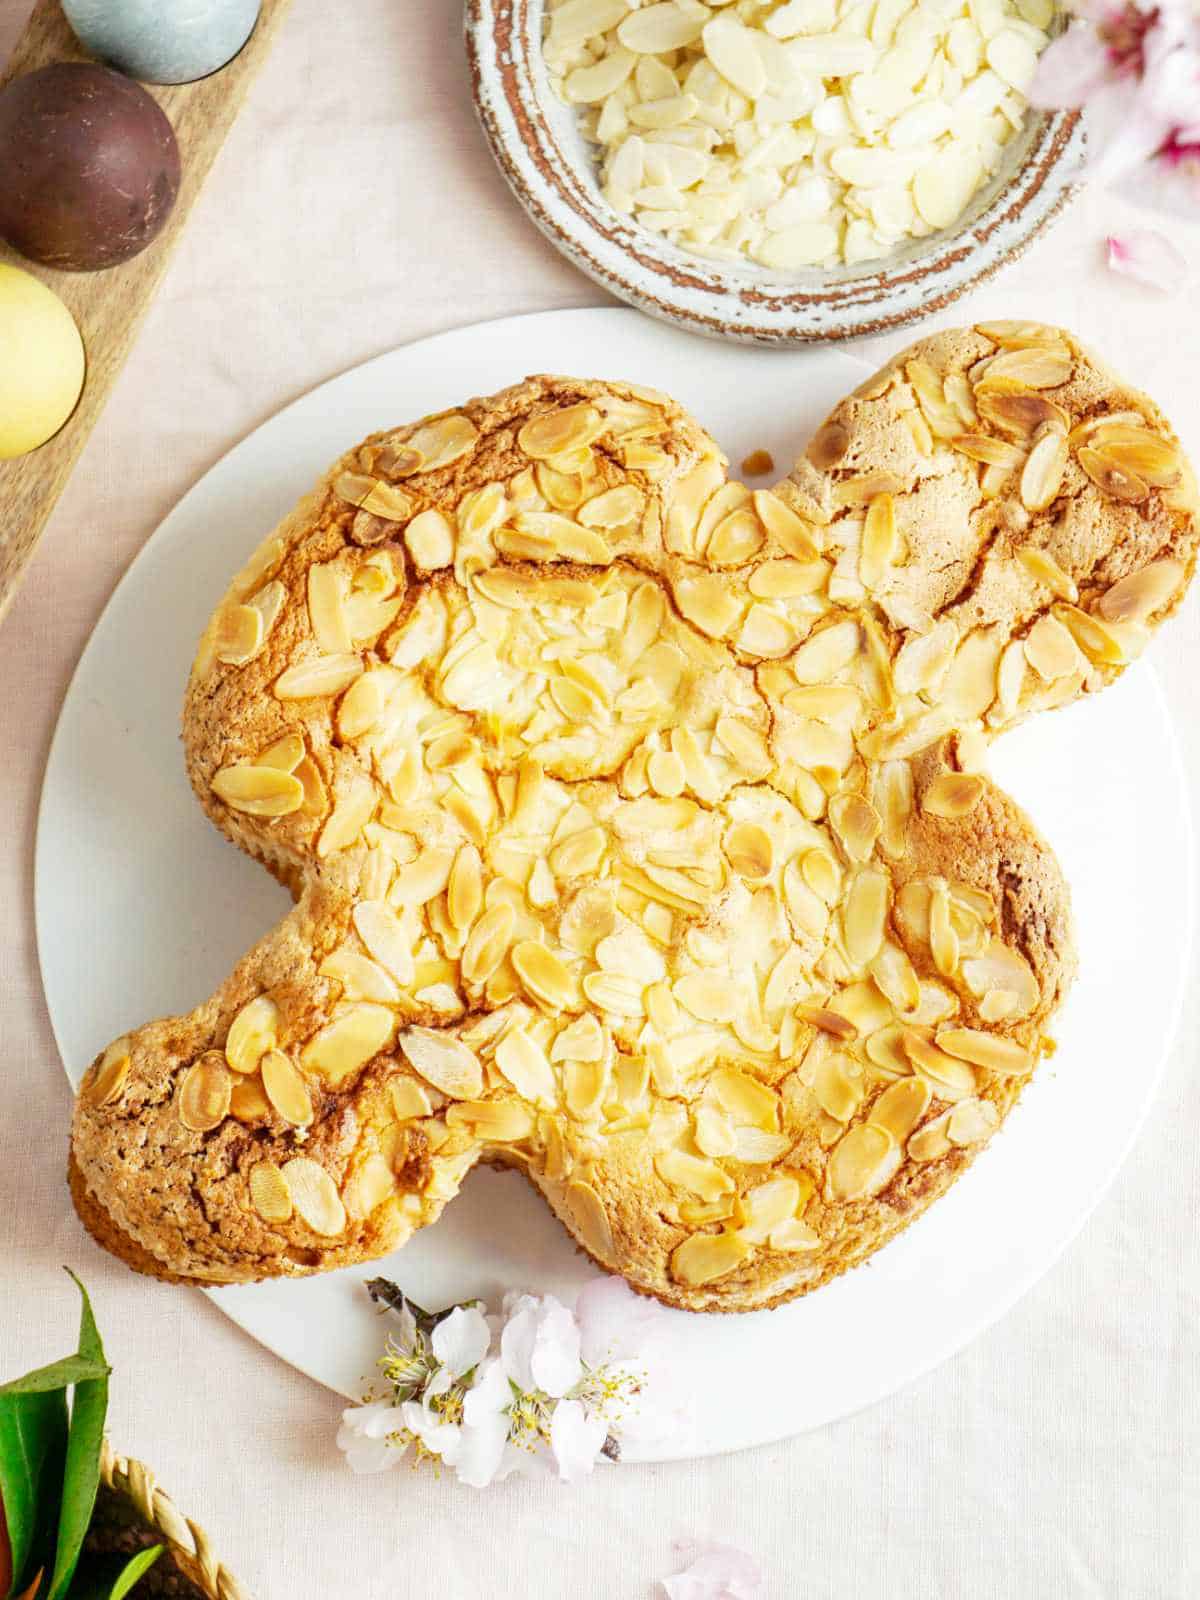 es the cake (or rather, bread) with Colomba Pasquale, a dove-shaped sweet bread symbolizing peace and the Holy Spirit.